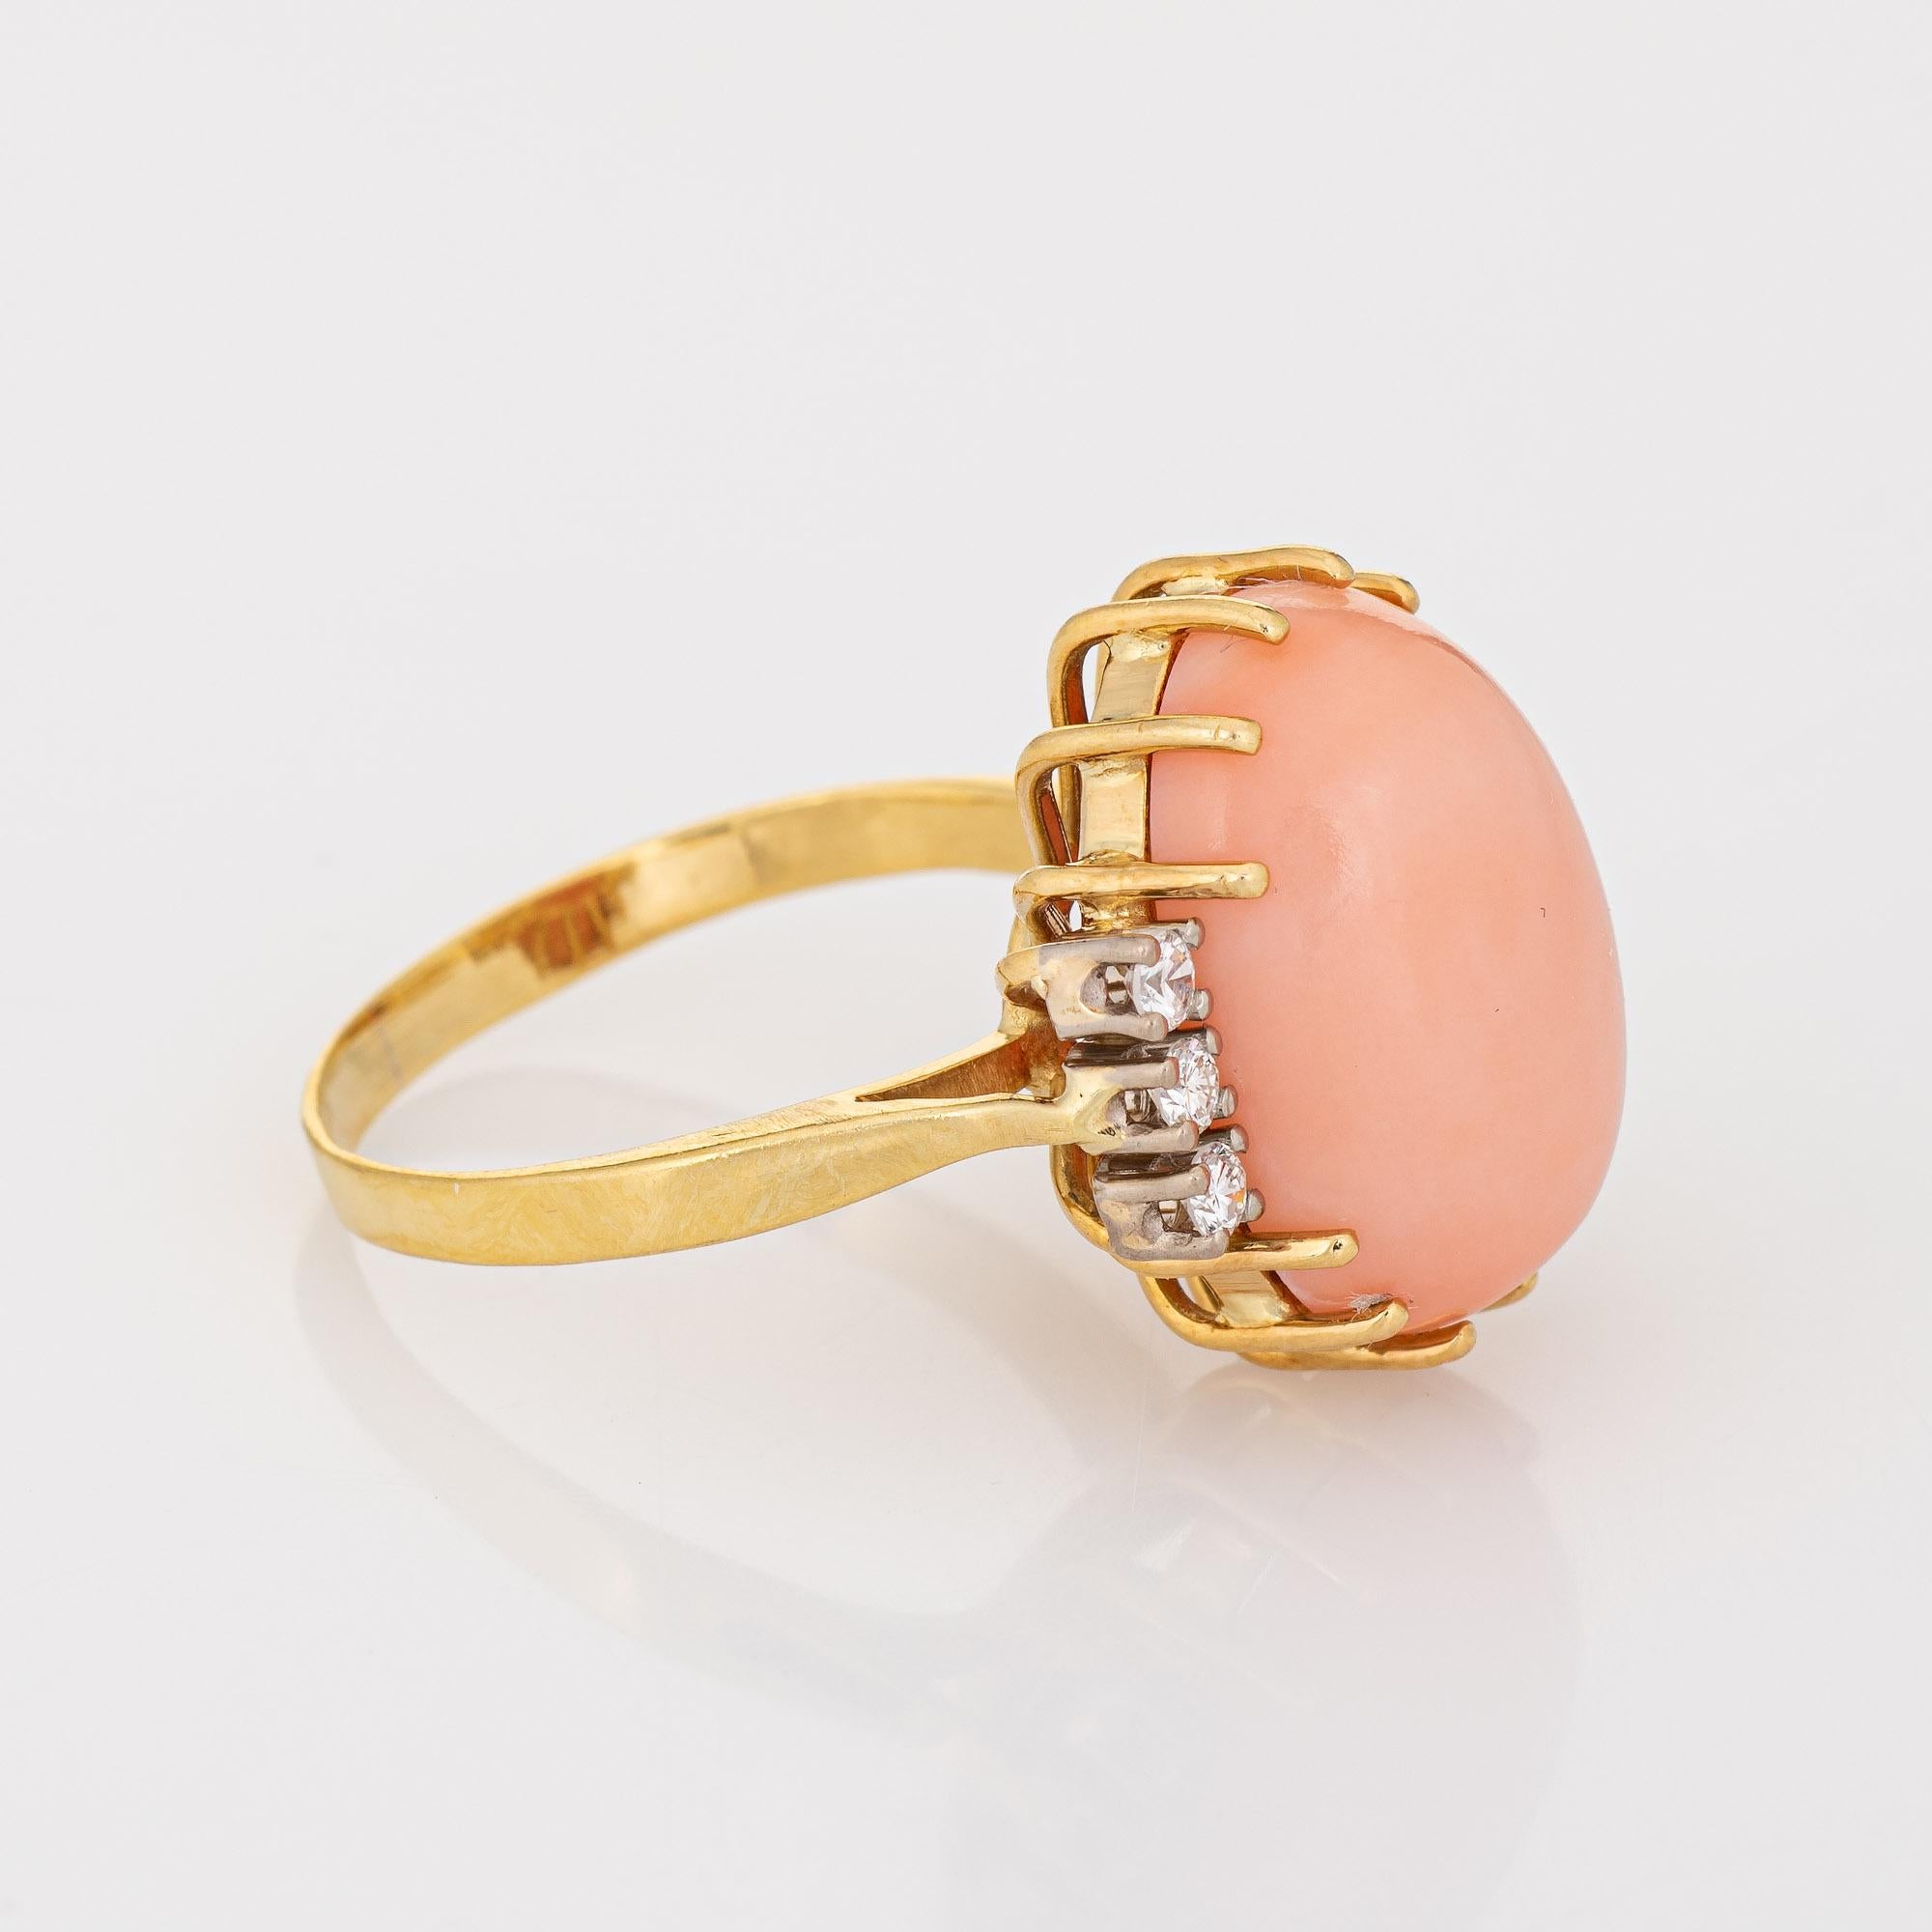 Modern Light Peach Coral Diamond Ring Vintage 18k Yellow Gold Cocktail Jewelry